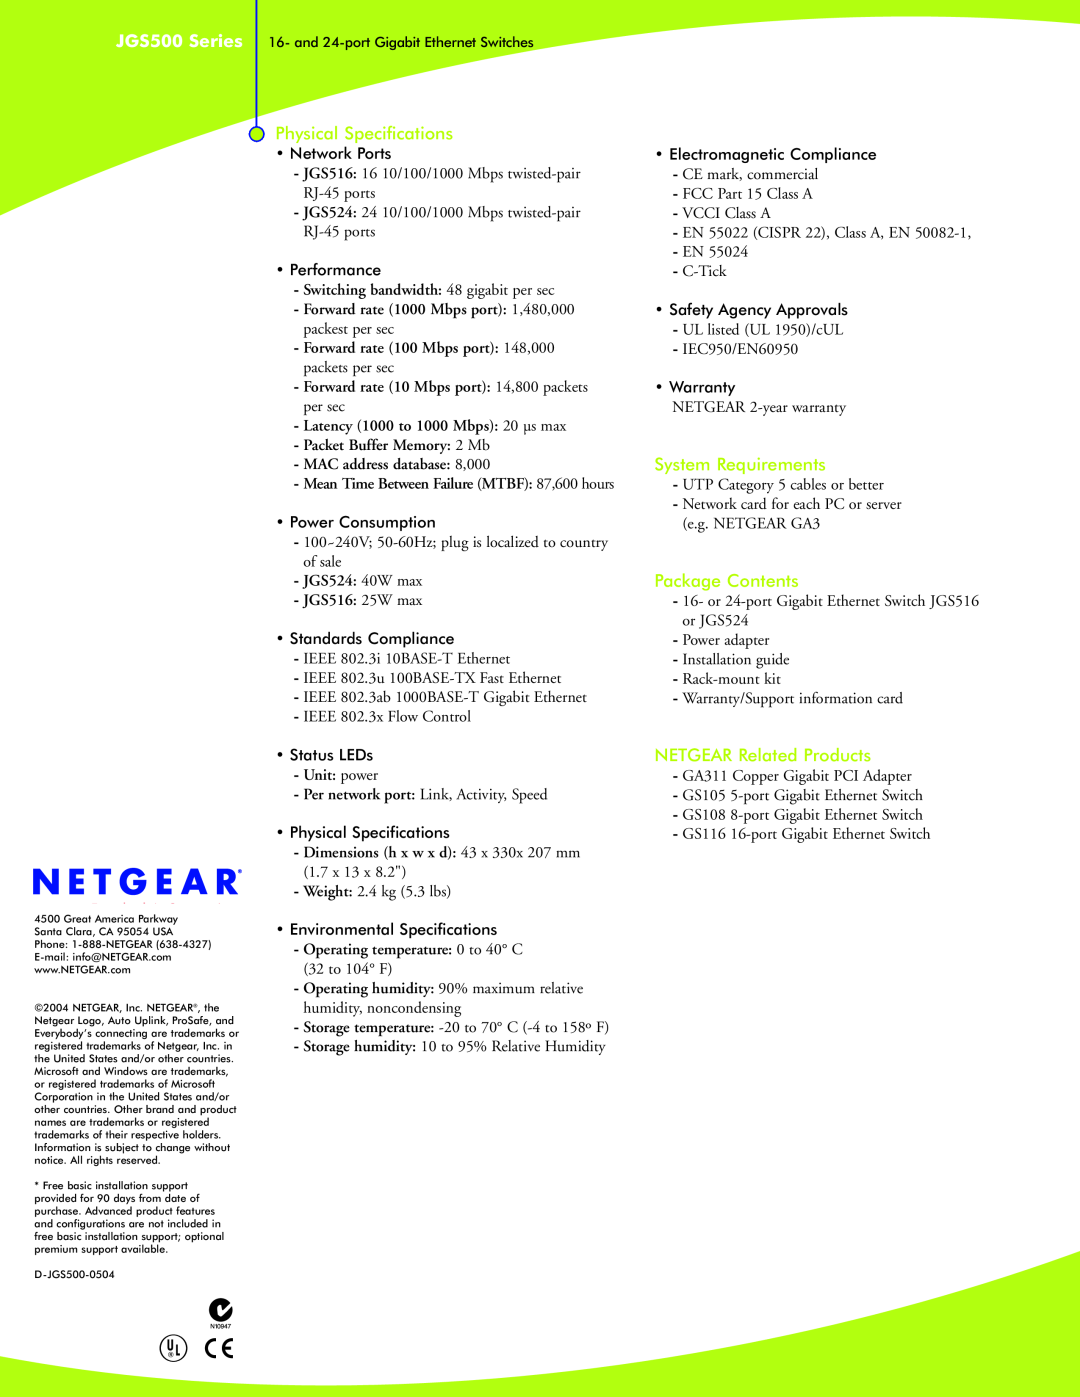 NETGEAR JGS500 manual Physical Specifications, System Requirements, Package Contents, NETGEAR Related Products 